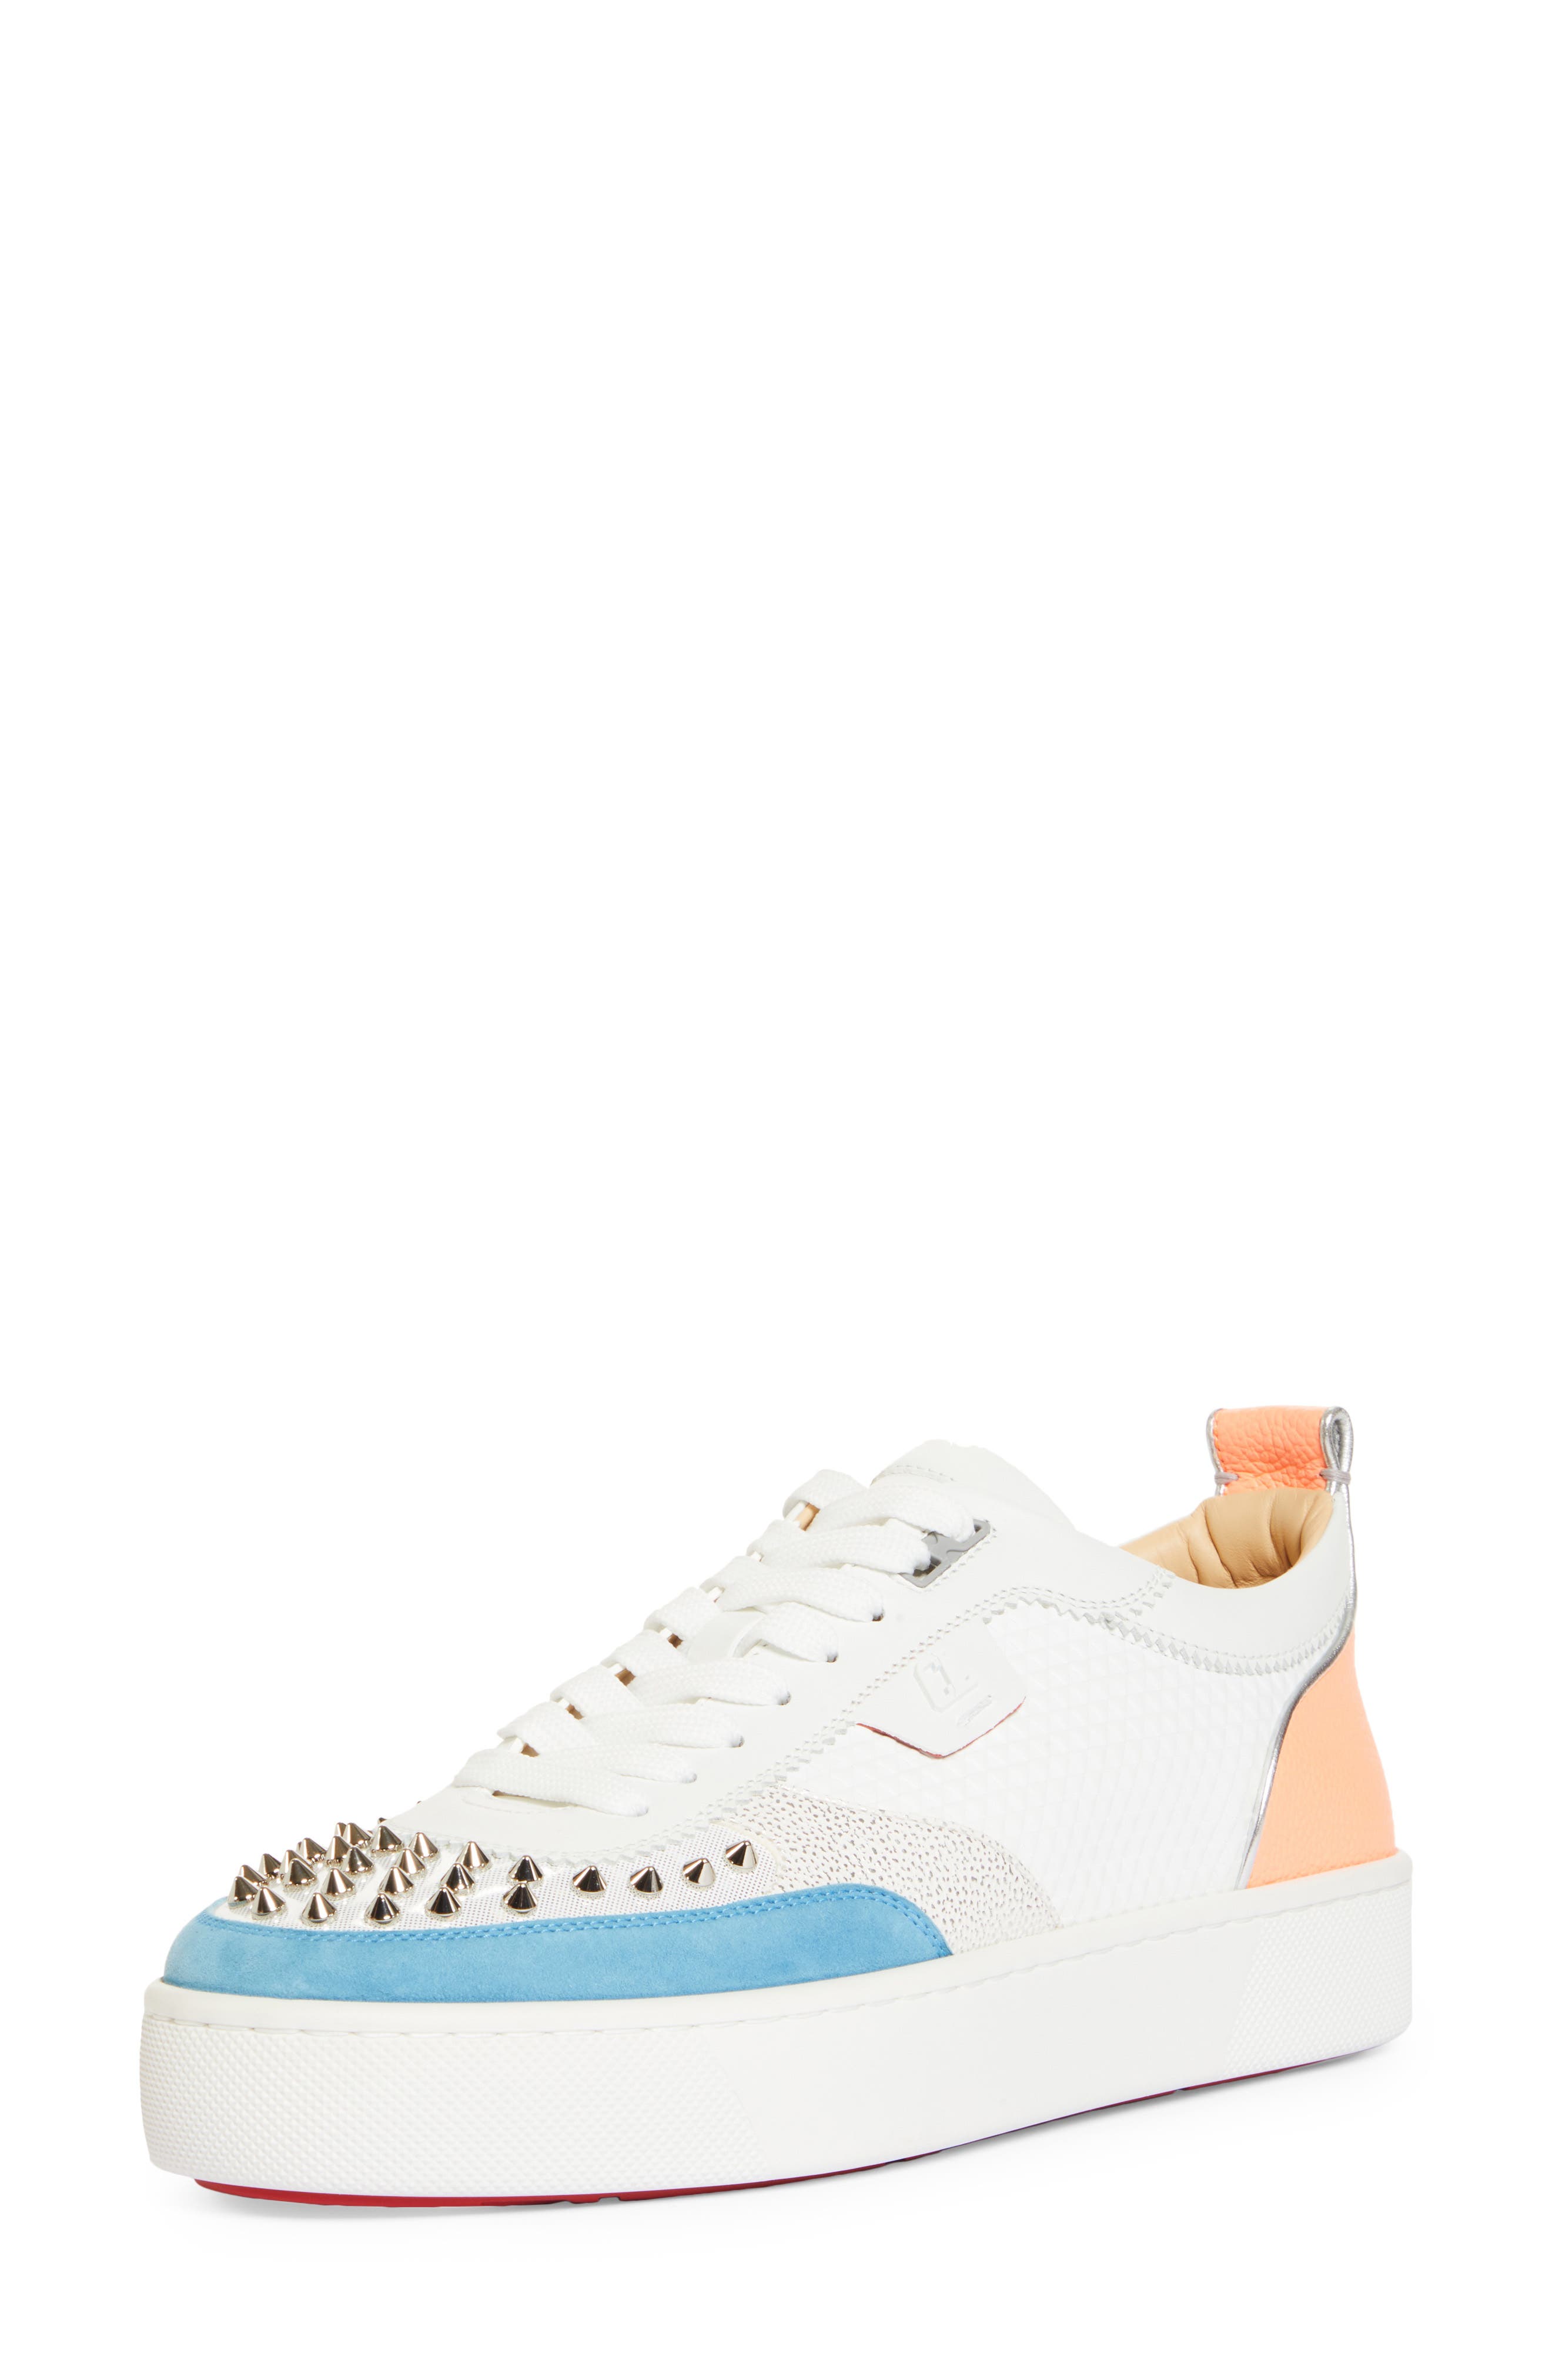 Christian Louboutin Happyrui Spikes Low Top Sneaker in Version Multi at Nordstrom, Size 10.5Us